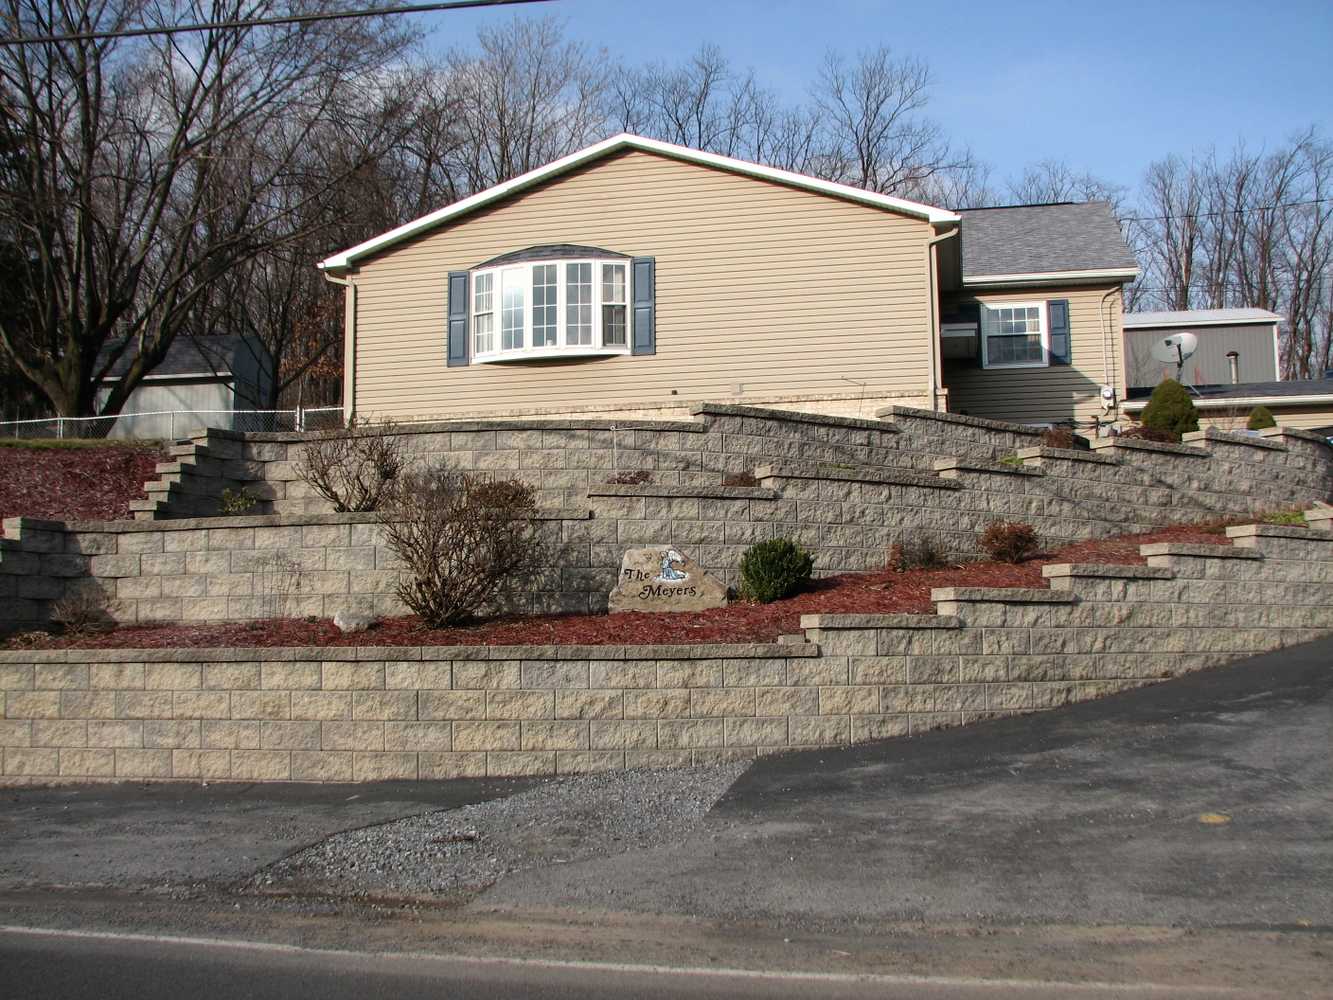 Retaining walls, accented driveways, and raised porches